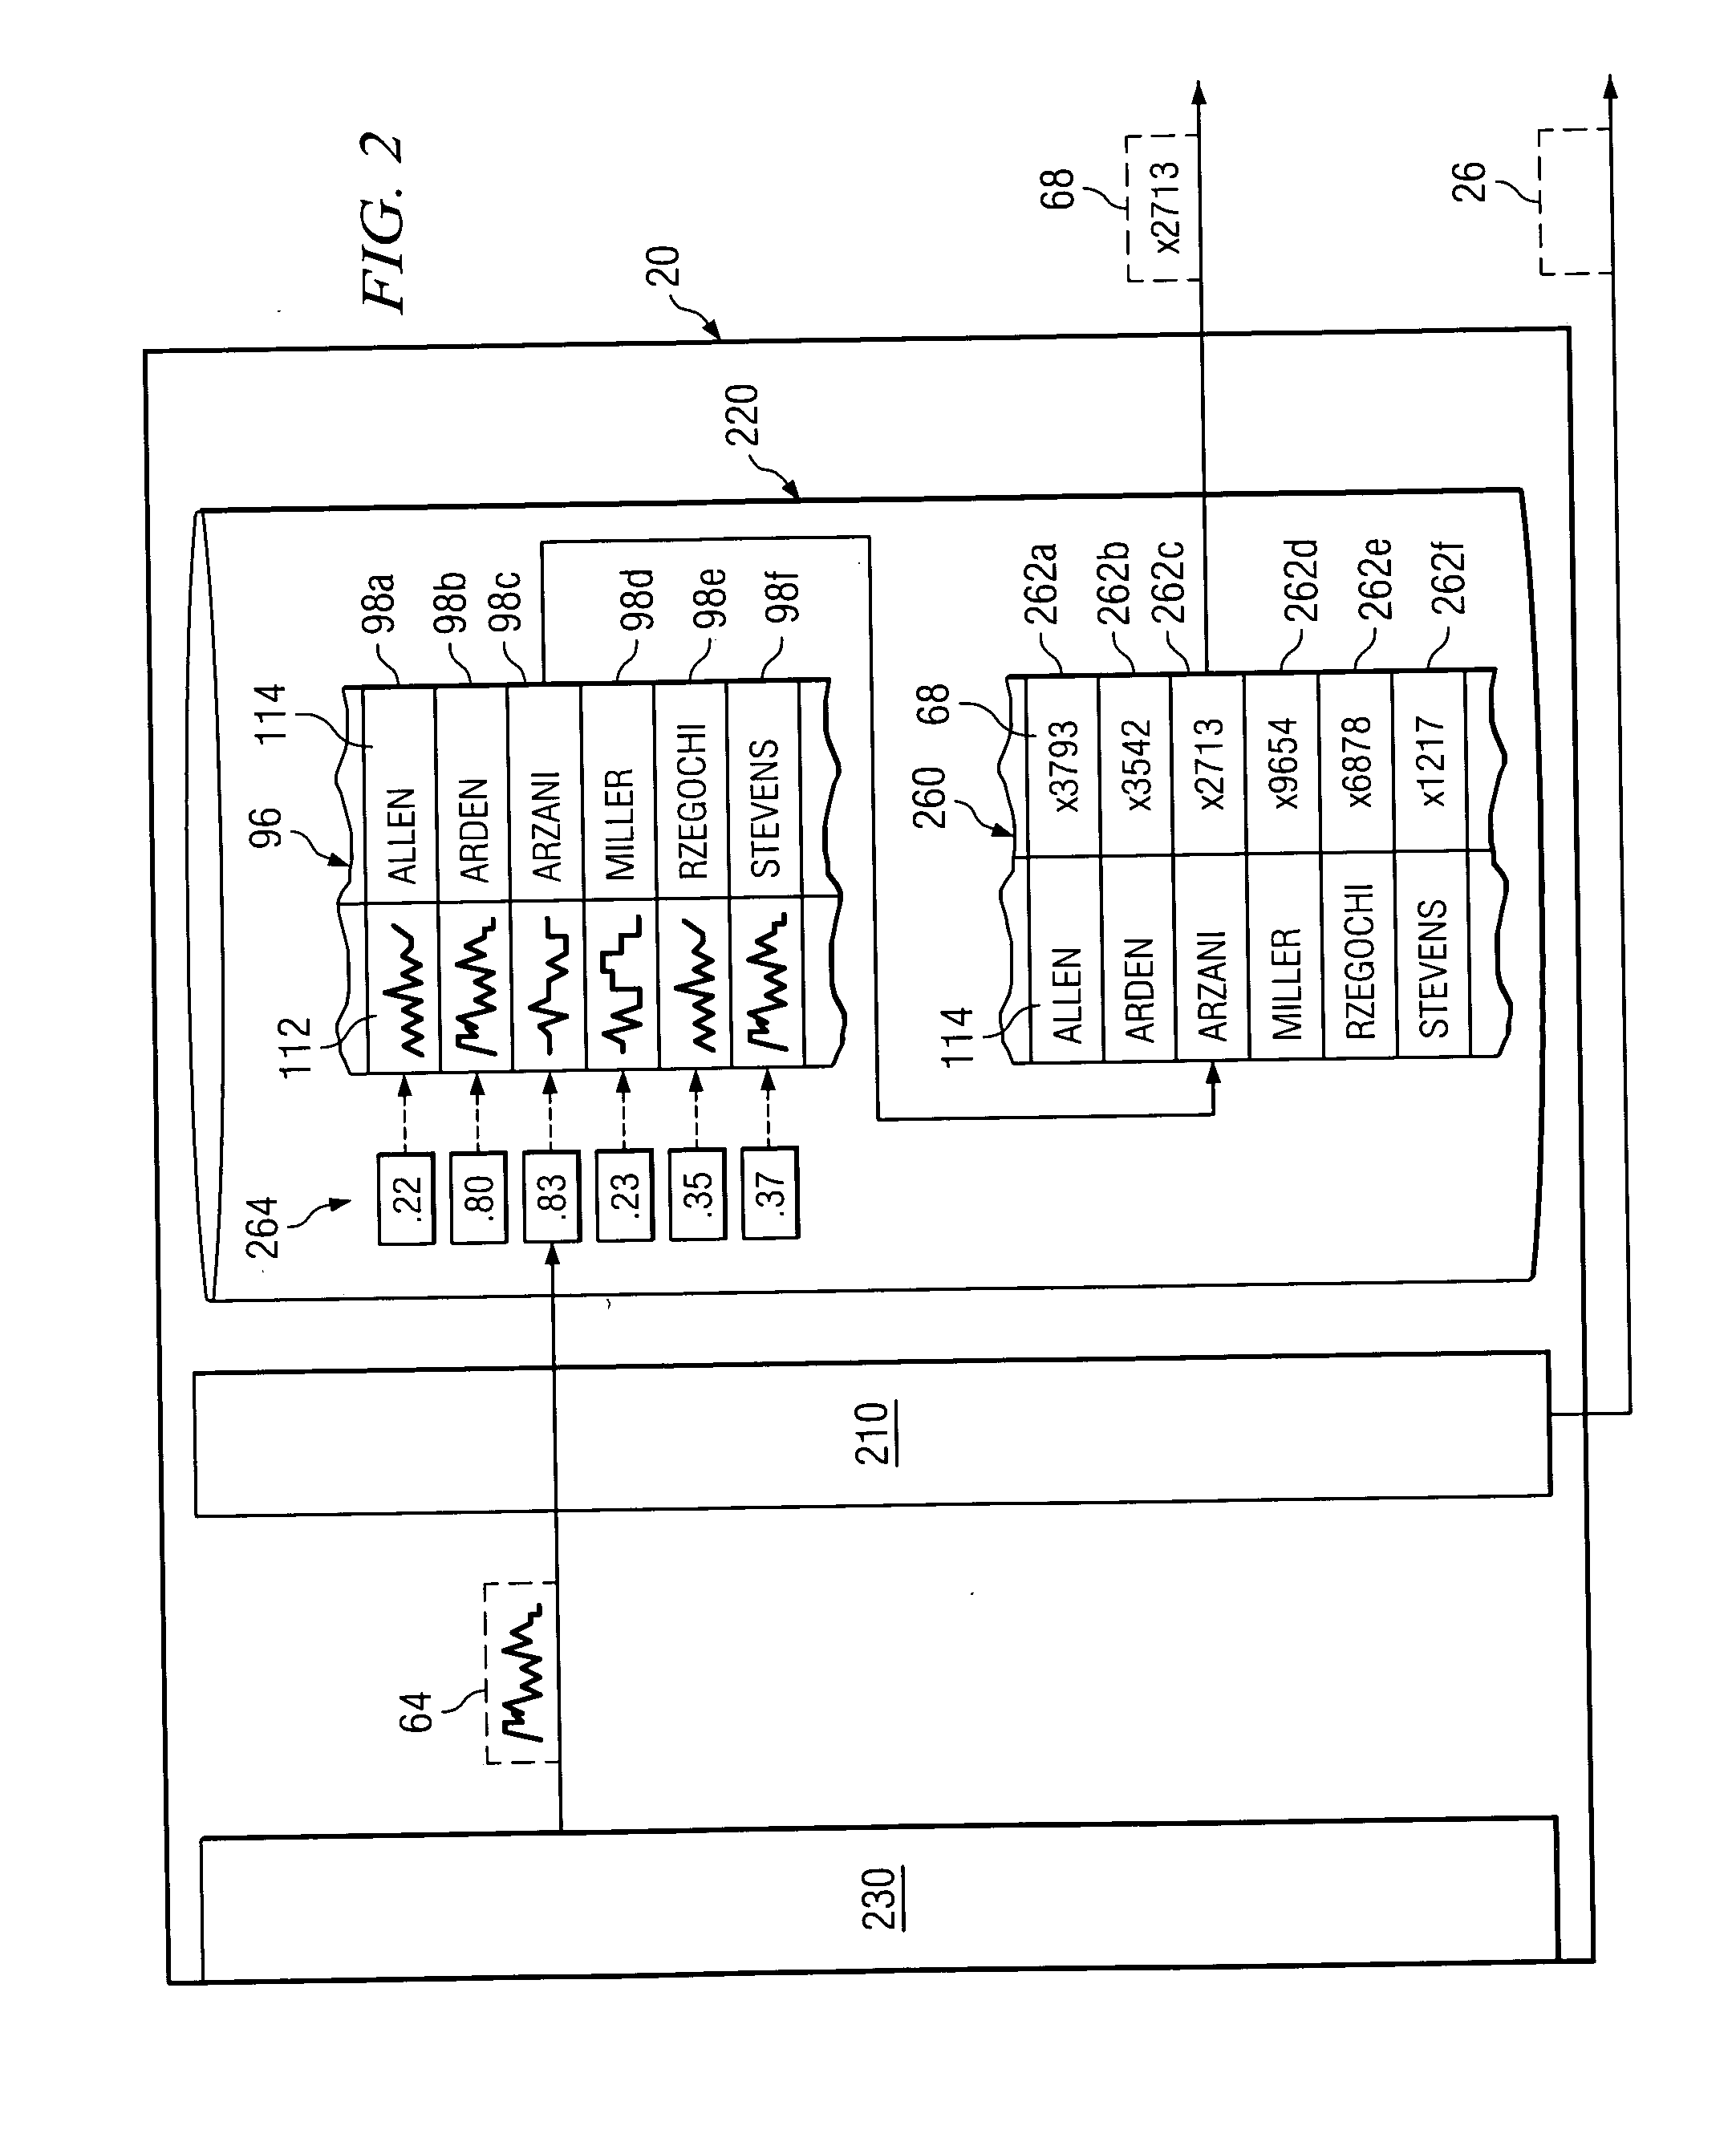 System and method for maintaining a speech-recognition grammar